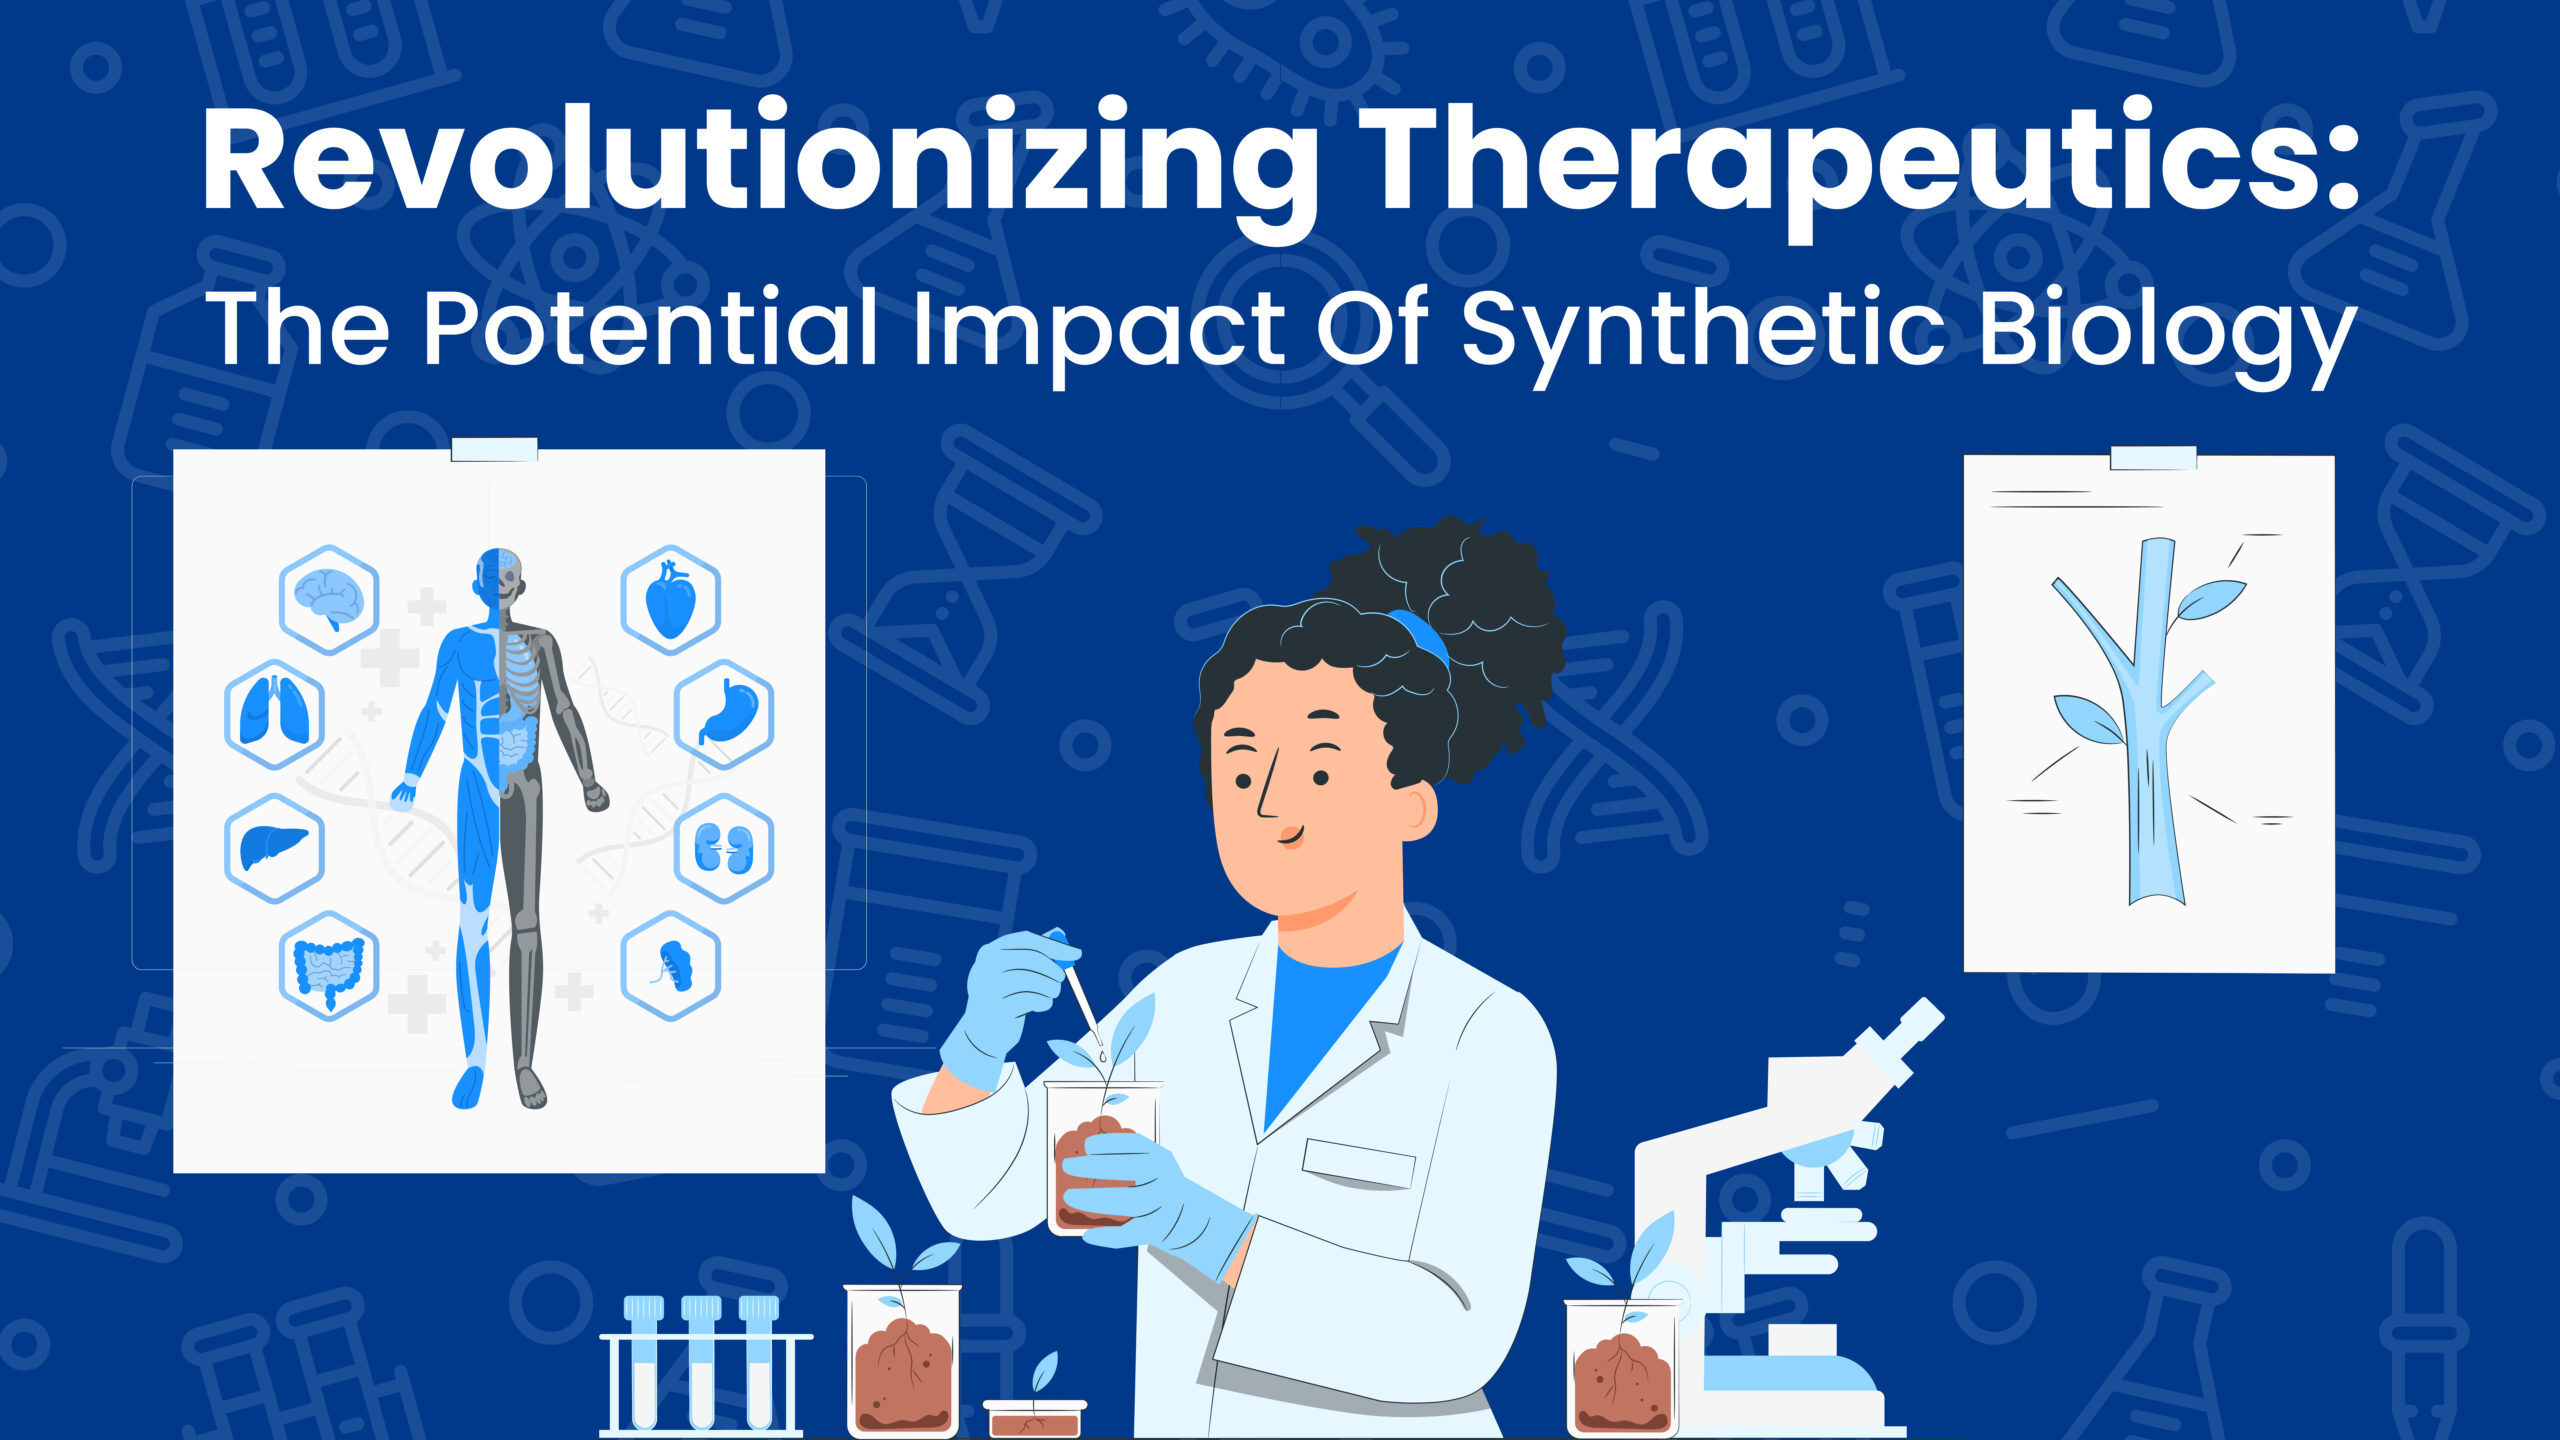 How synthetic biology could change therapeutics